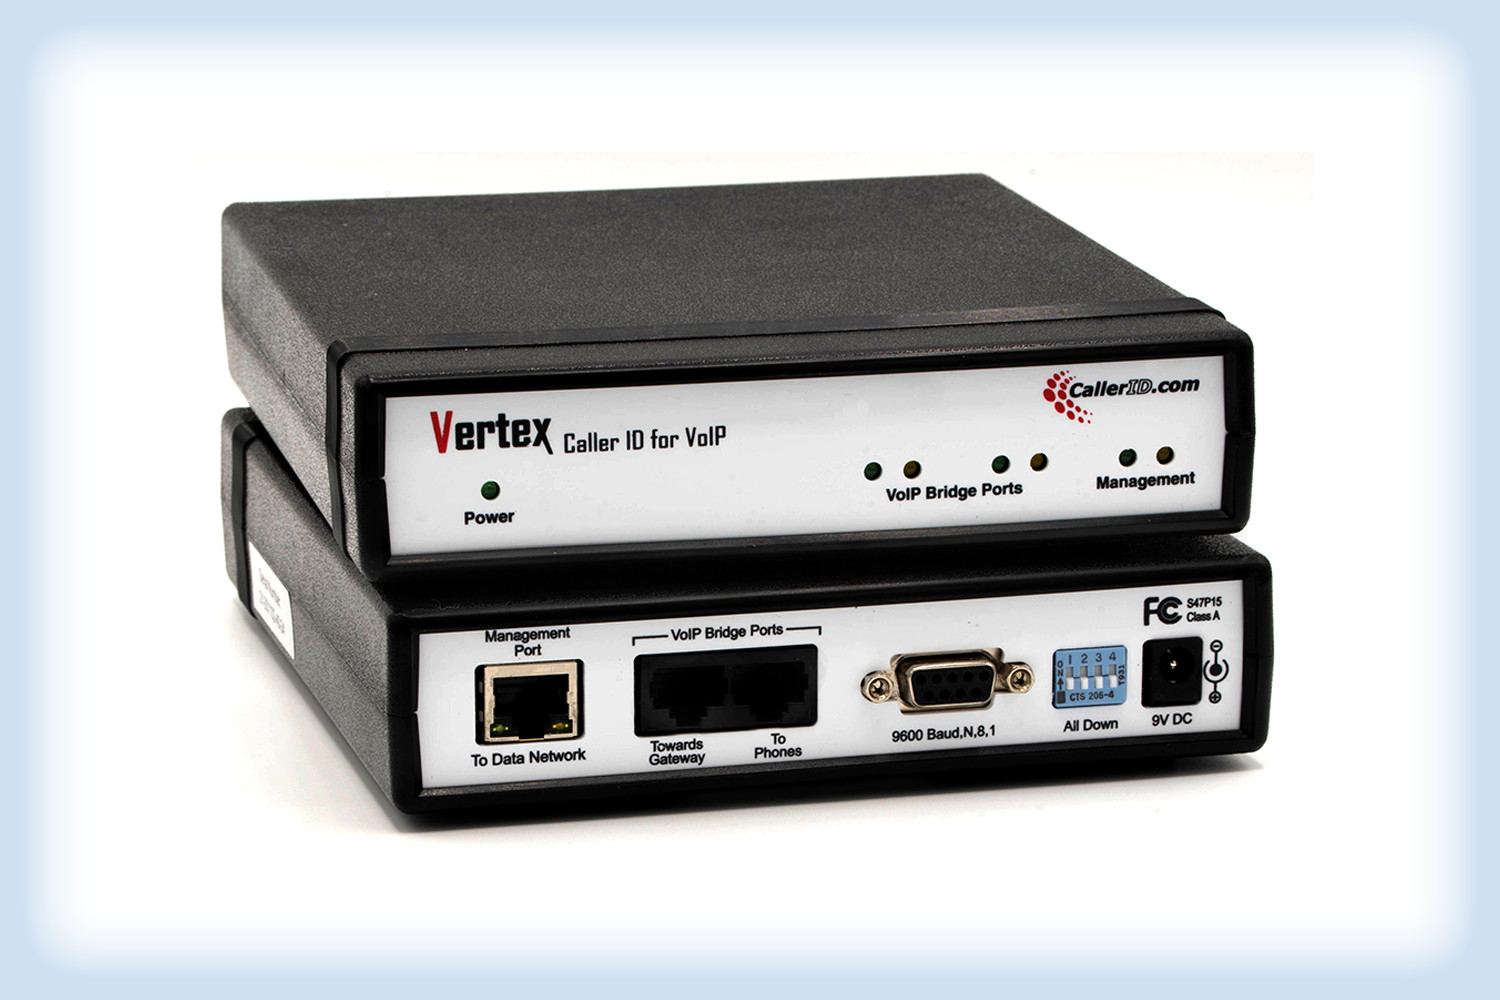 Set of Vertex products showing off the front and back panel. Connections are ethernet for the 'Management Port', 2 ethernet for 'Voip Bridge Ports', RS232 Serial output, 4 switches for configuration, and a barrel jack for power.